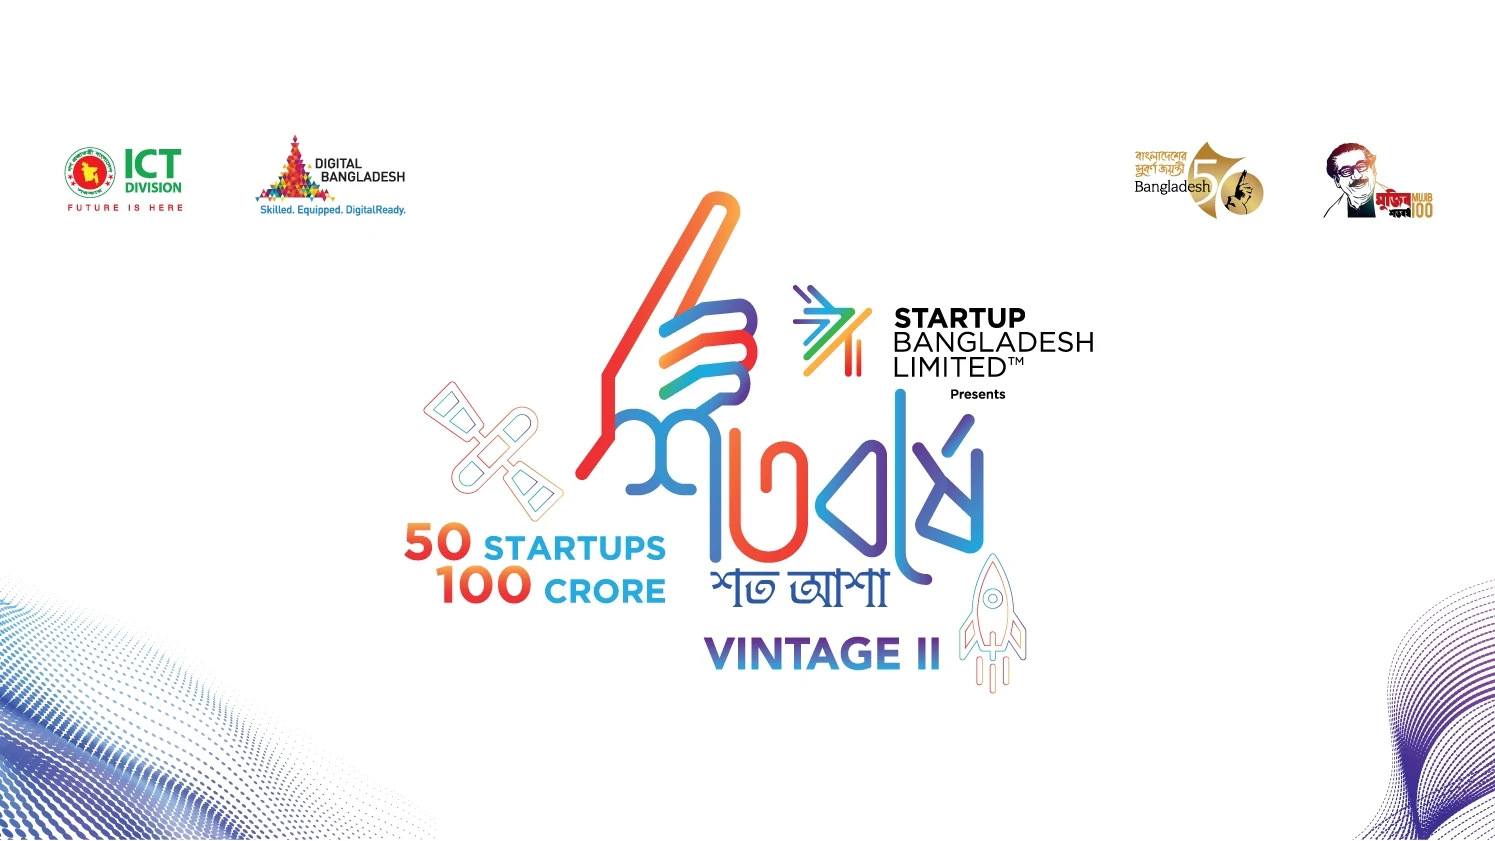 Startup Bangladesh made its Vintage II Investments in 8 Startups